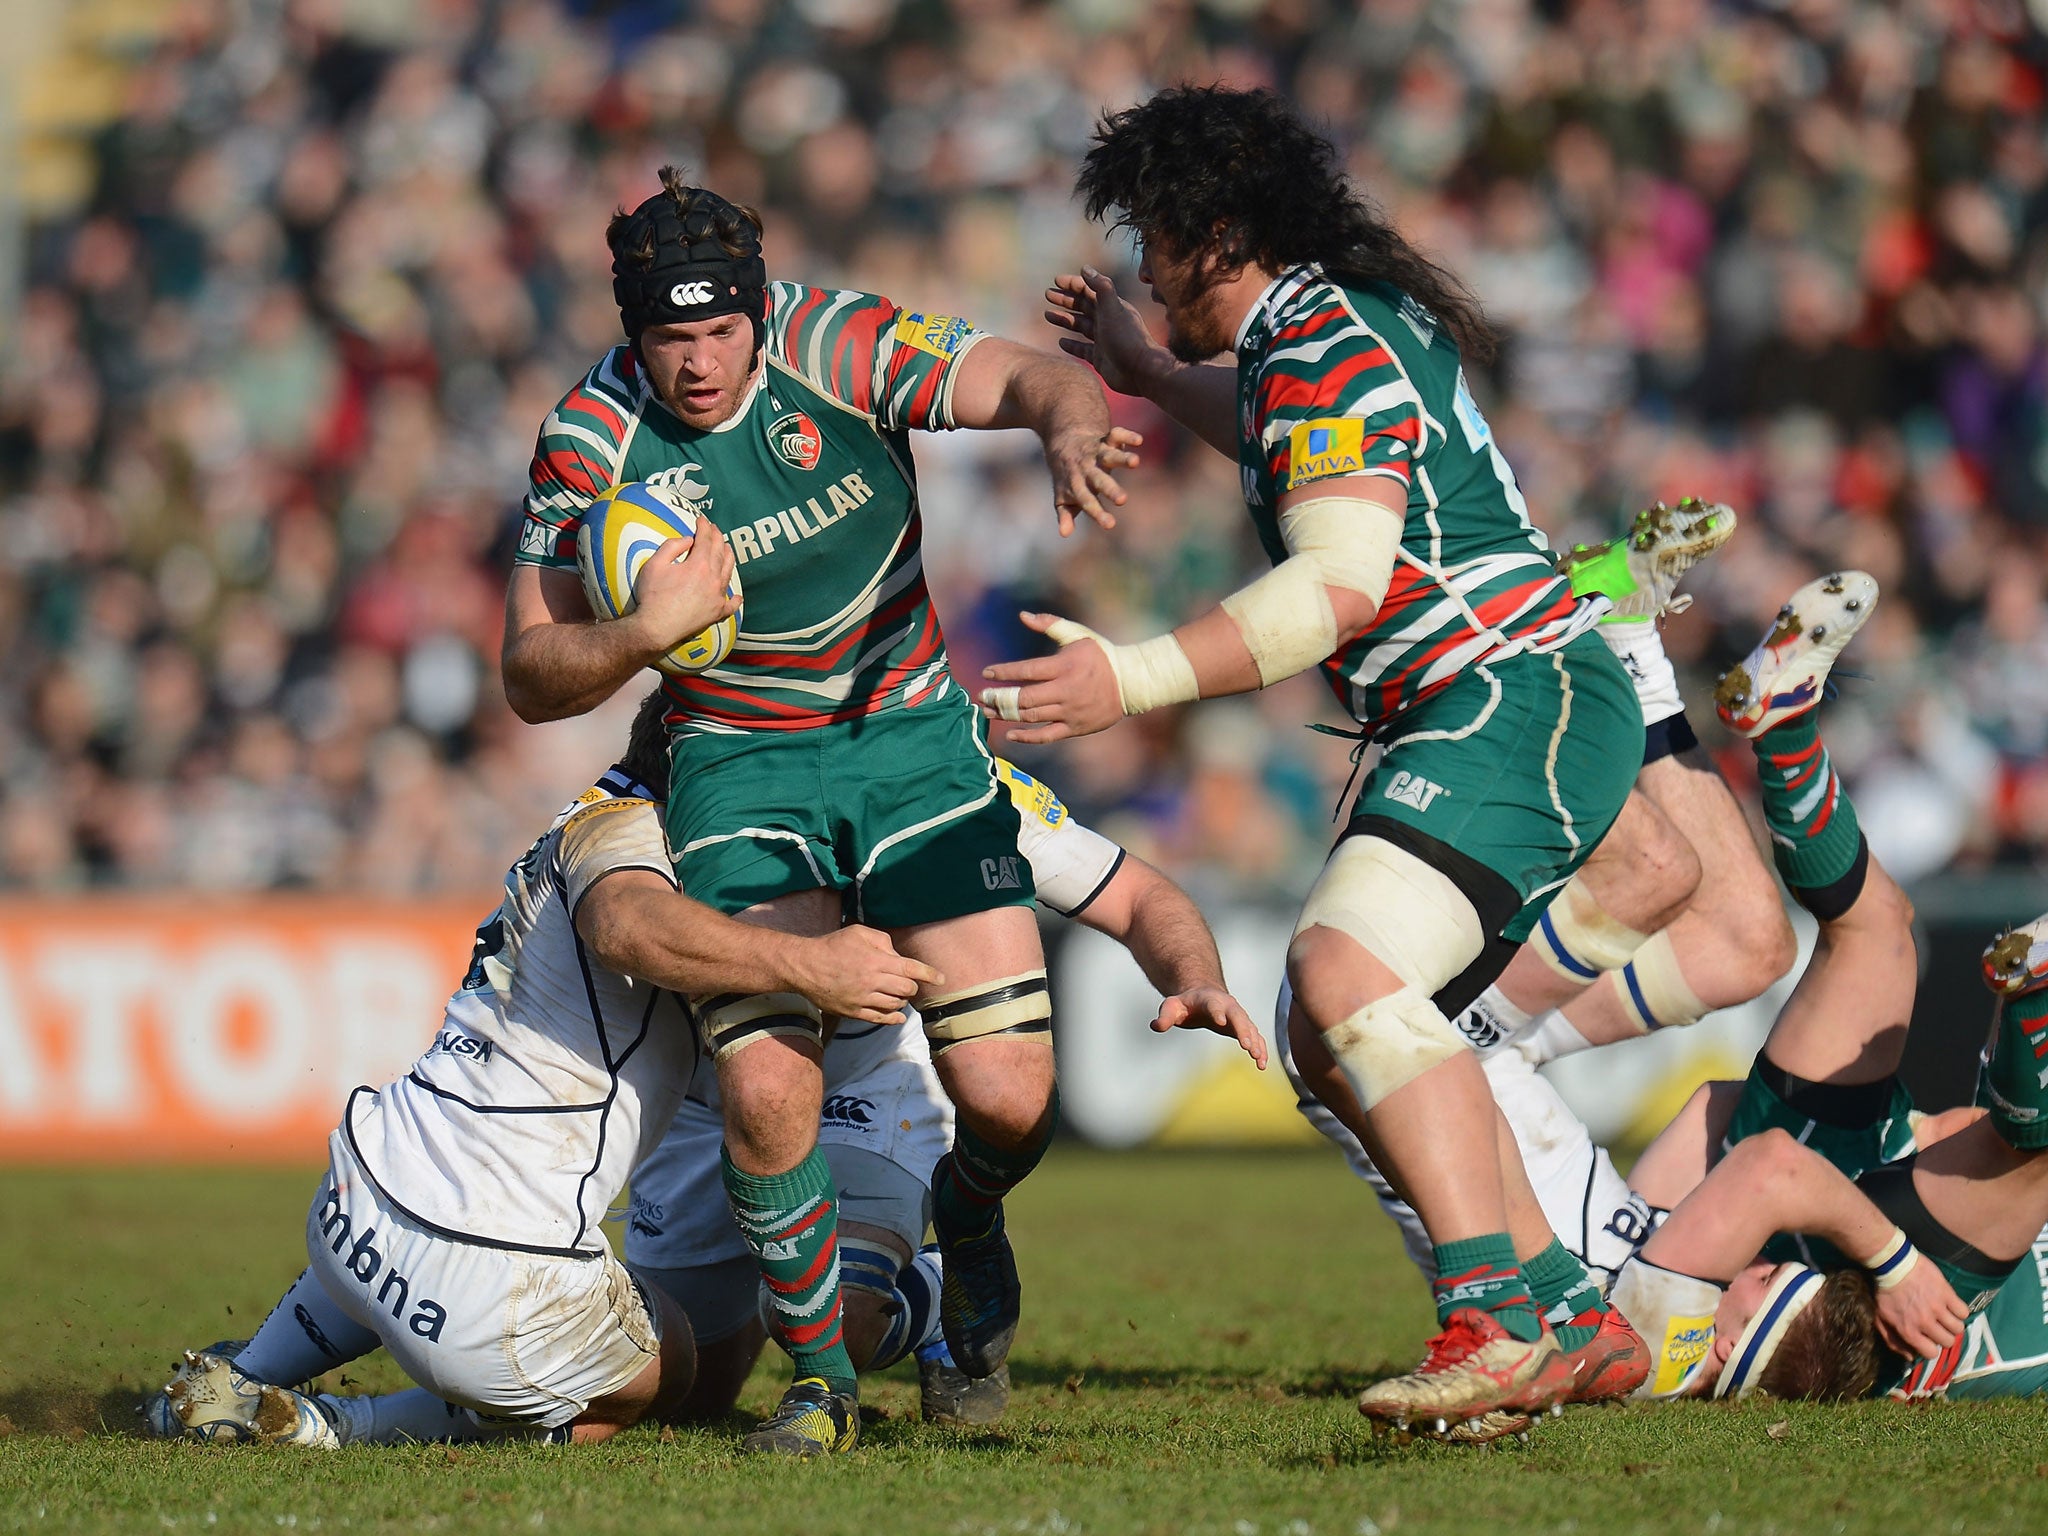 Julian Salvi of Leicester Tigers breaks through the Sale Sharks defence